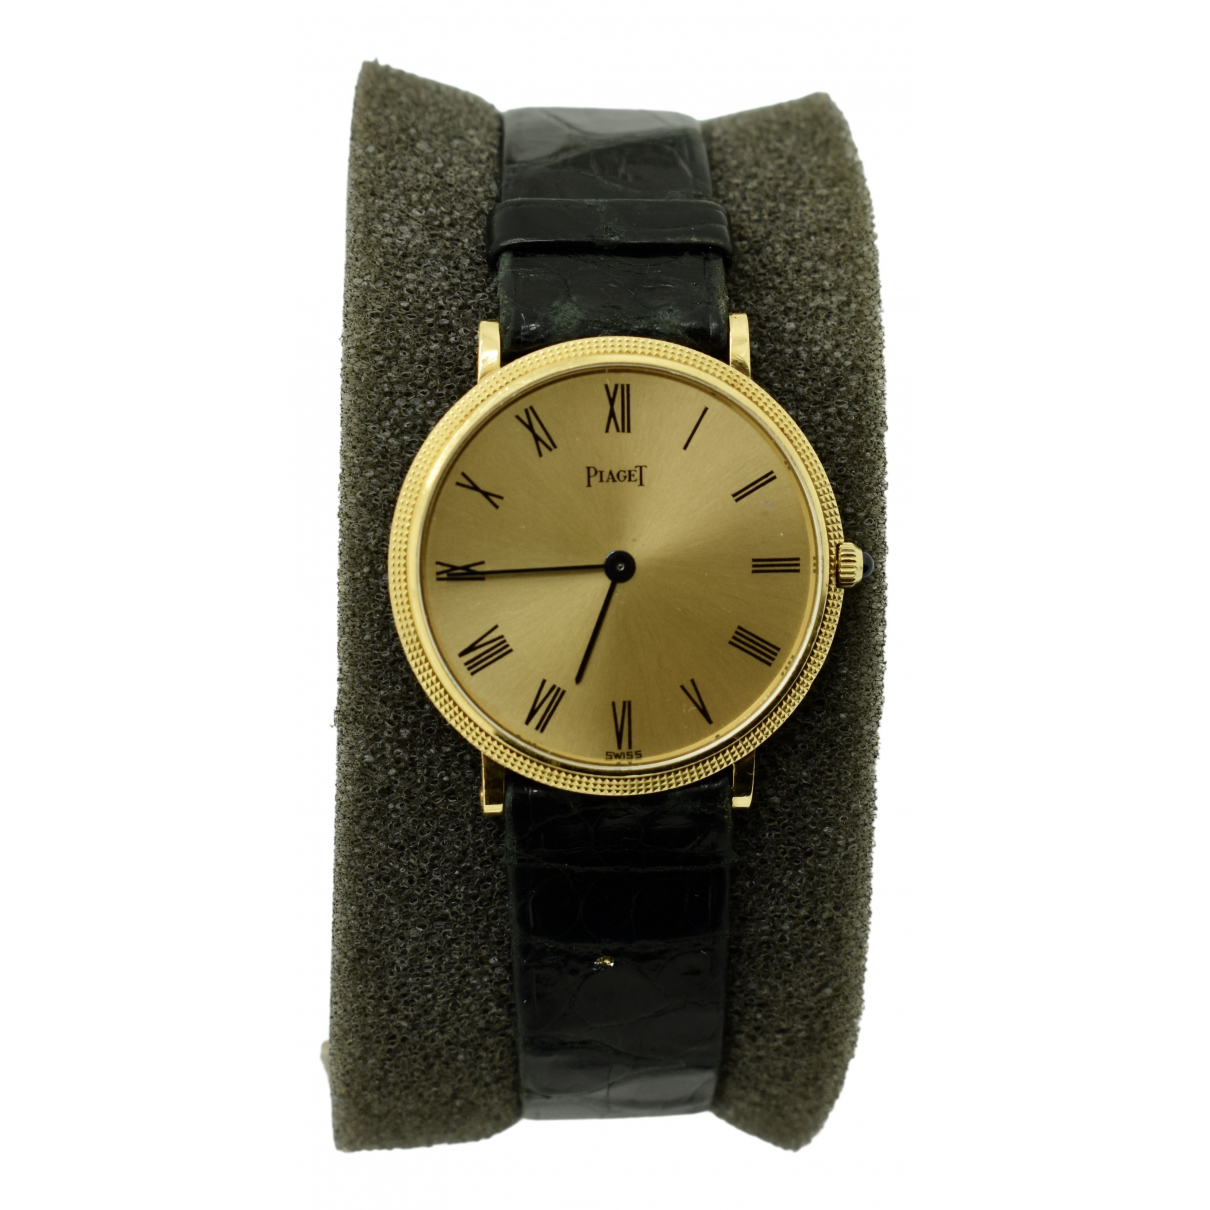 image of Piaget Classique yellow gold watch